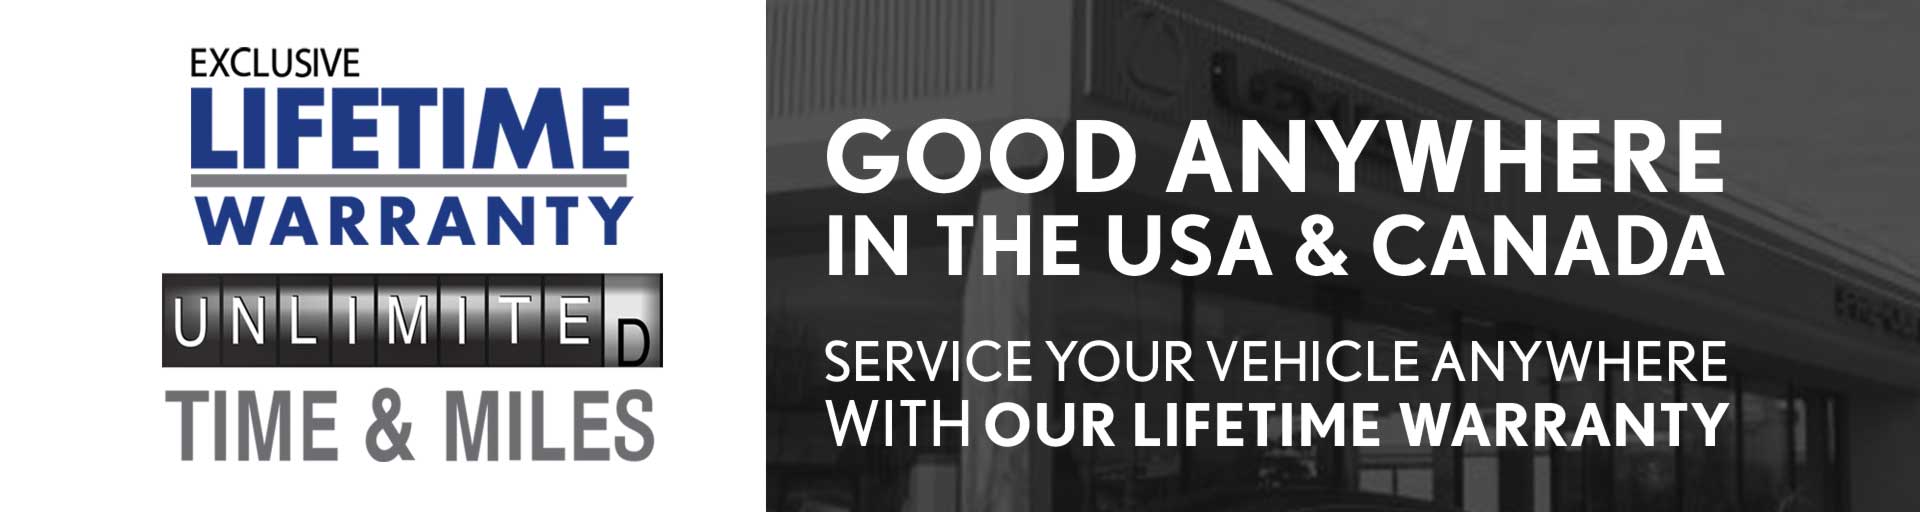 Service Your Vehicle Anywhere with Our Lifetime Warranty